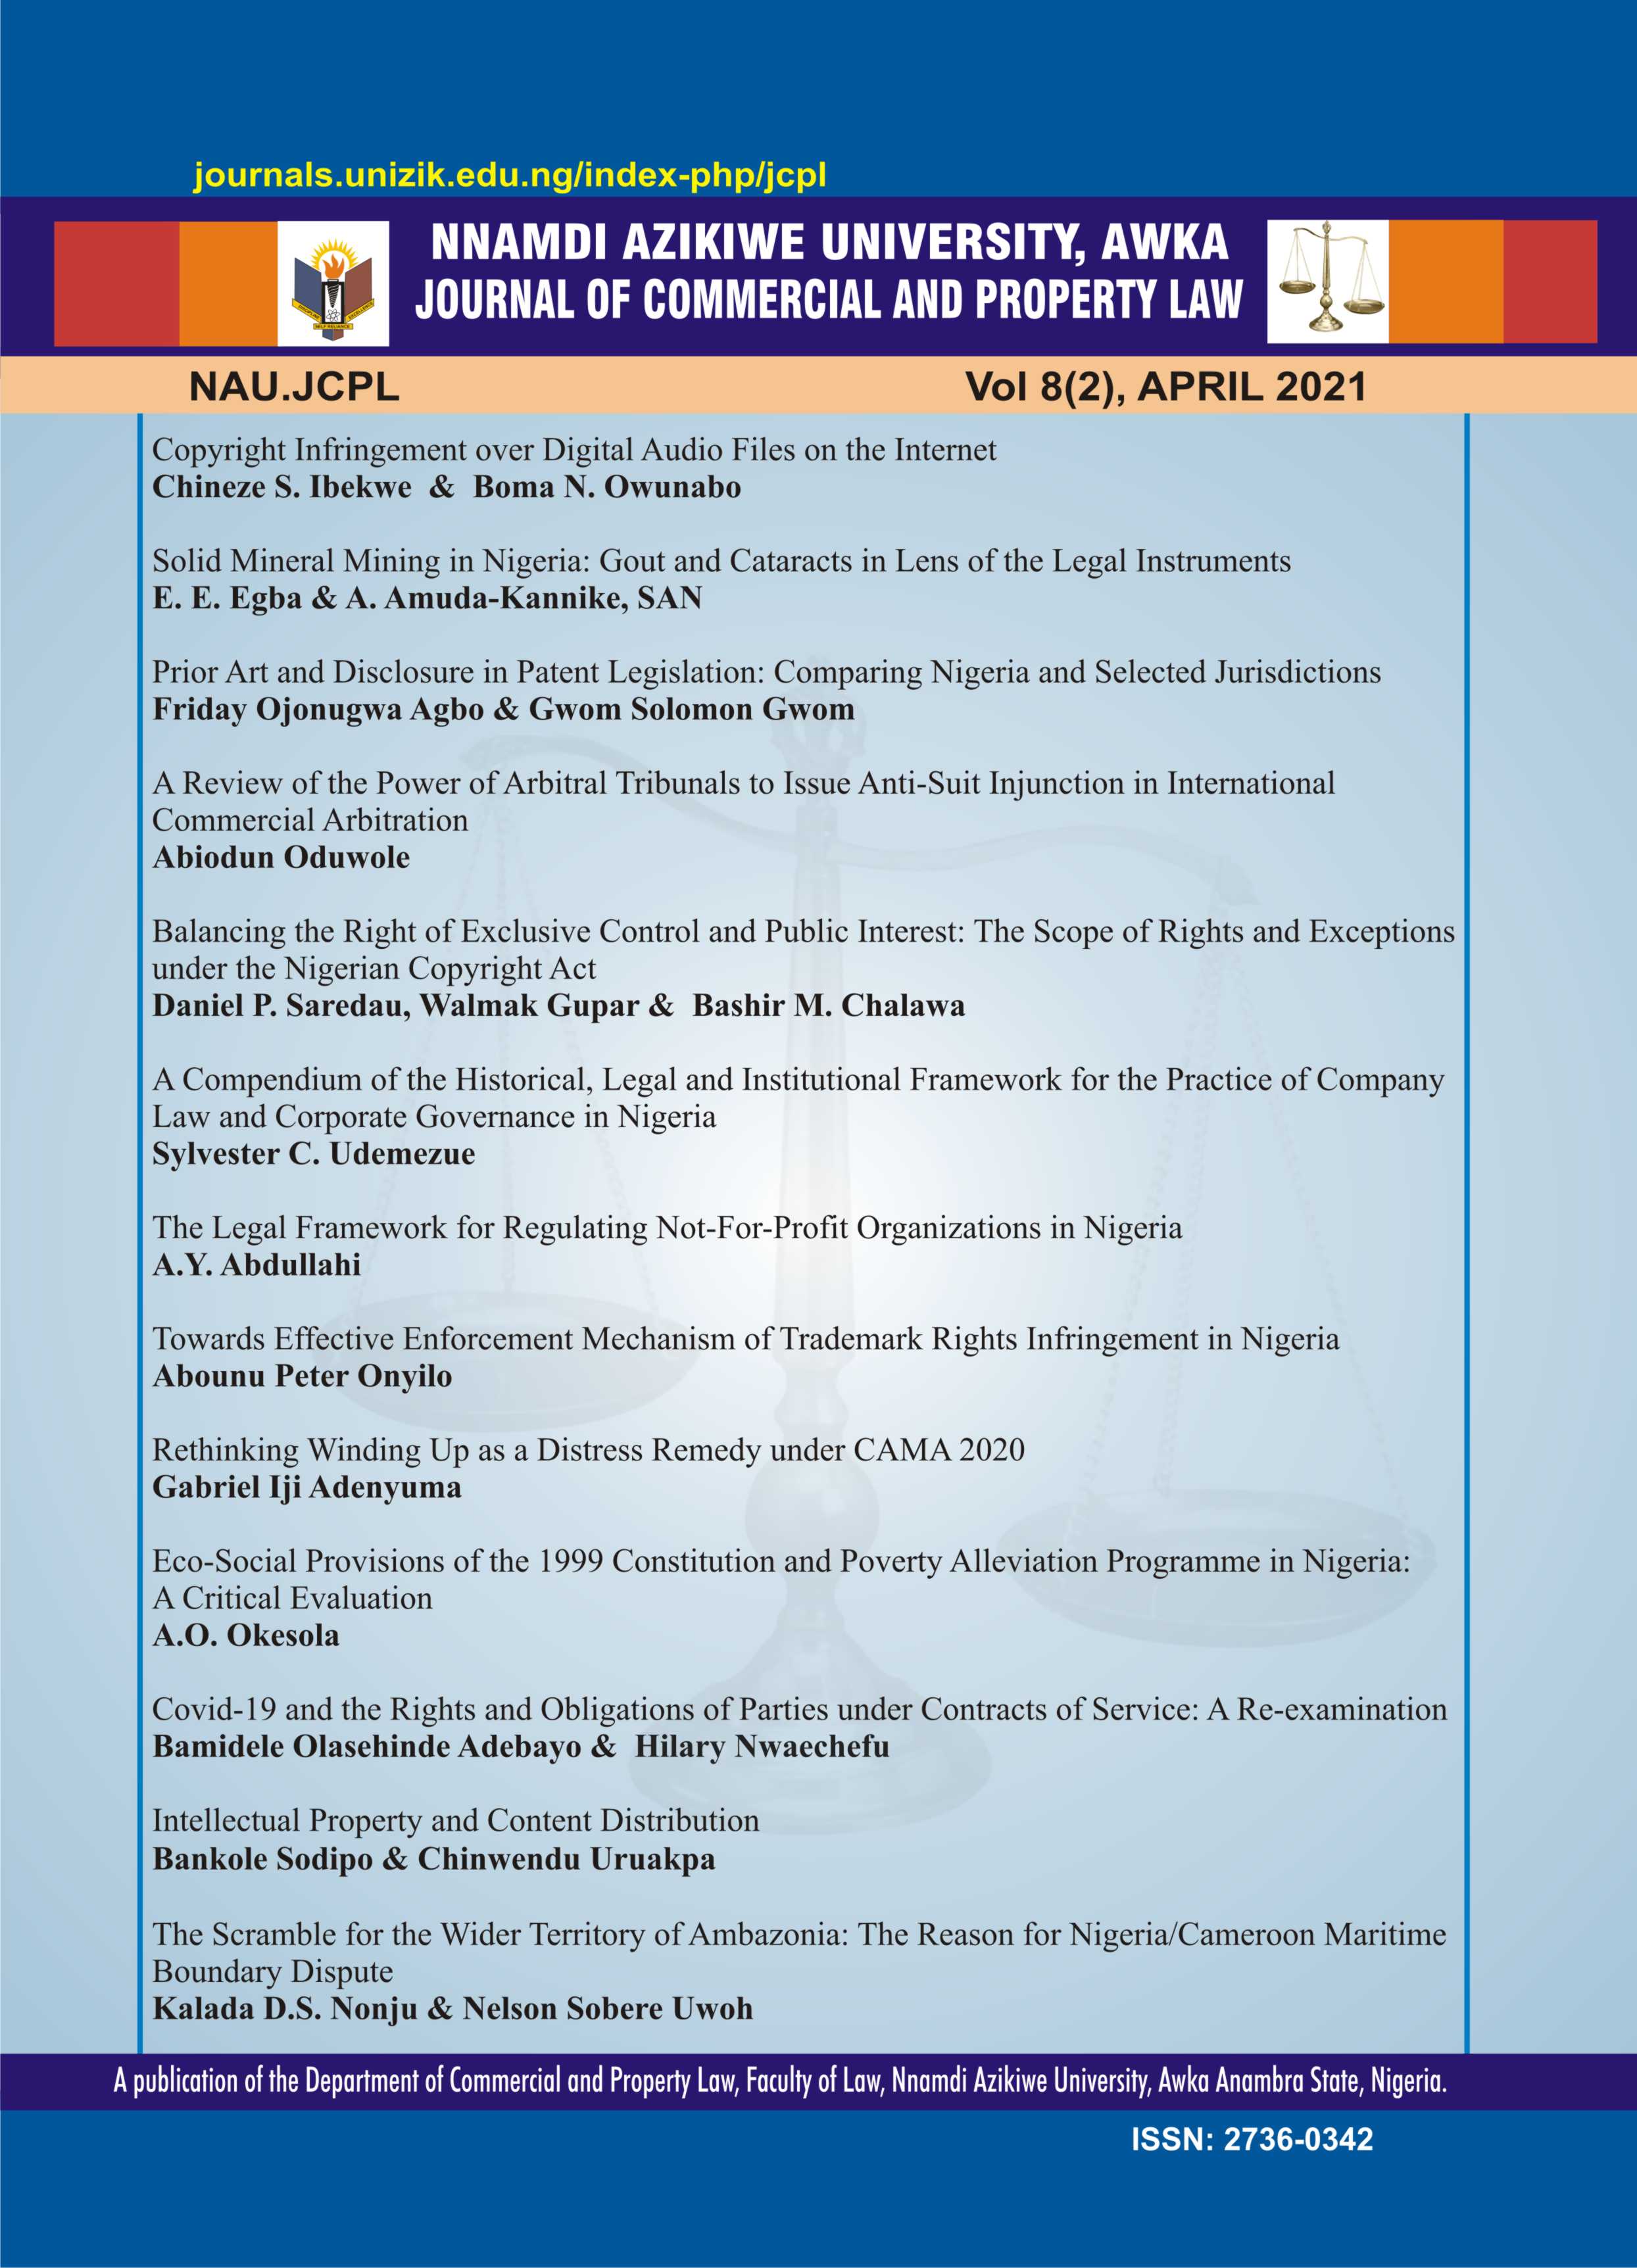 					View Vol. 8 No. 2 (2021): NNAMDI AZIKIWE UNIVERSITY JOURNAL OF COMMERCIAL AND PROPERTY LAW
				